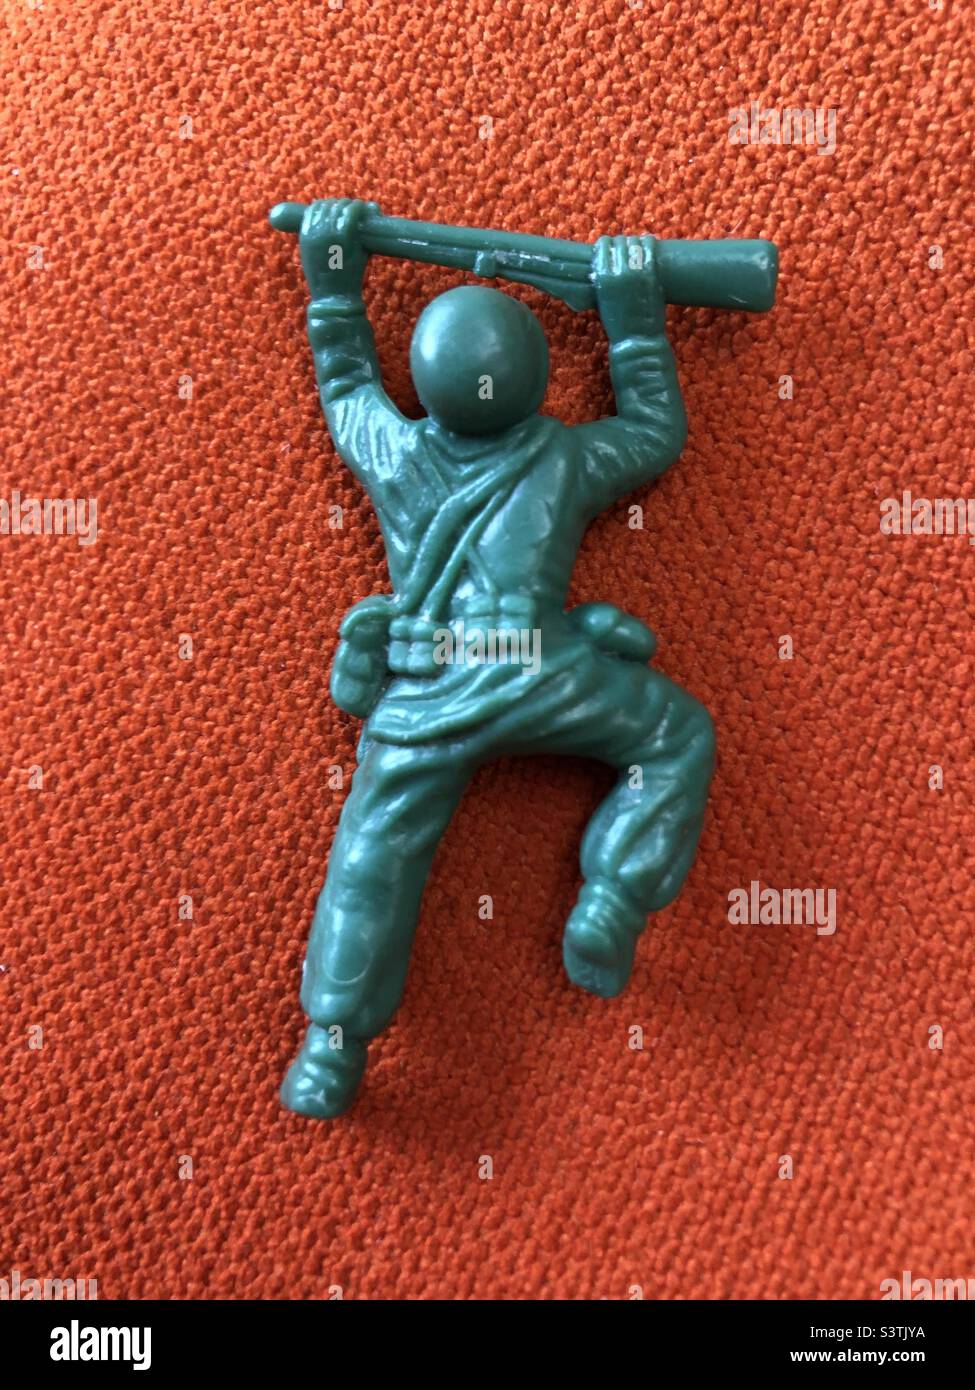 Toy soldier crawling Stock Photo